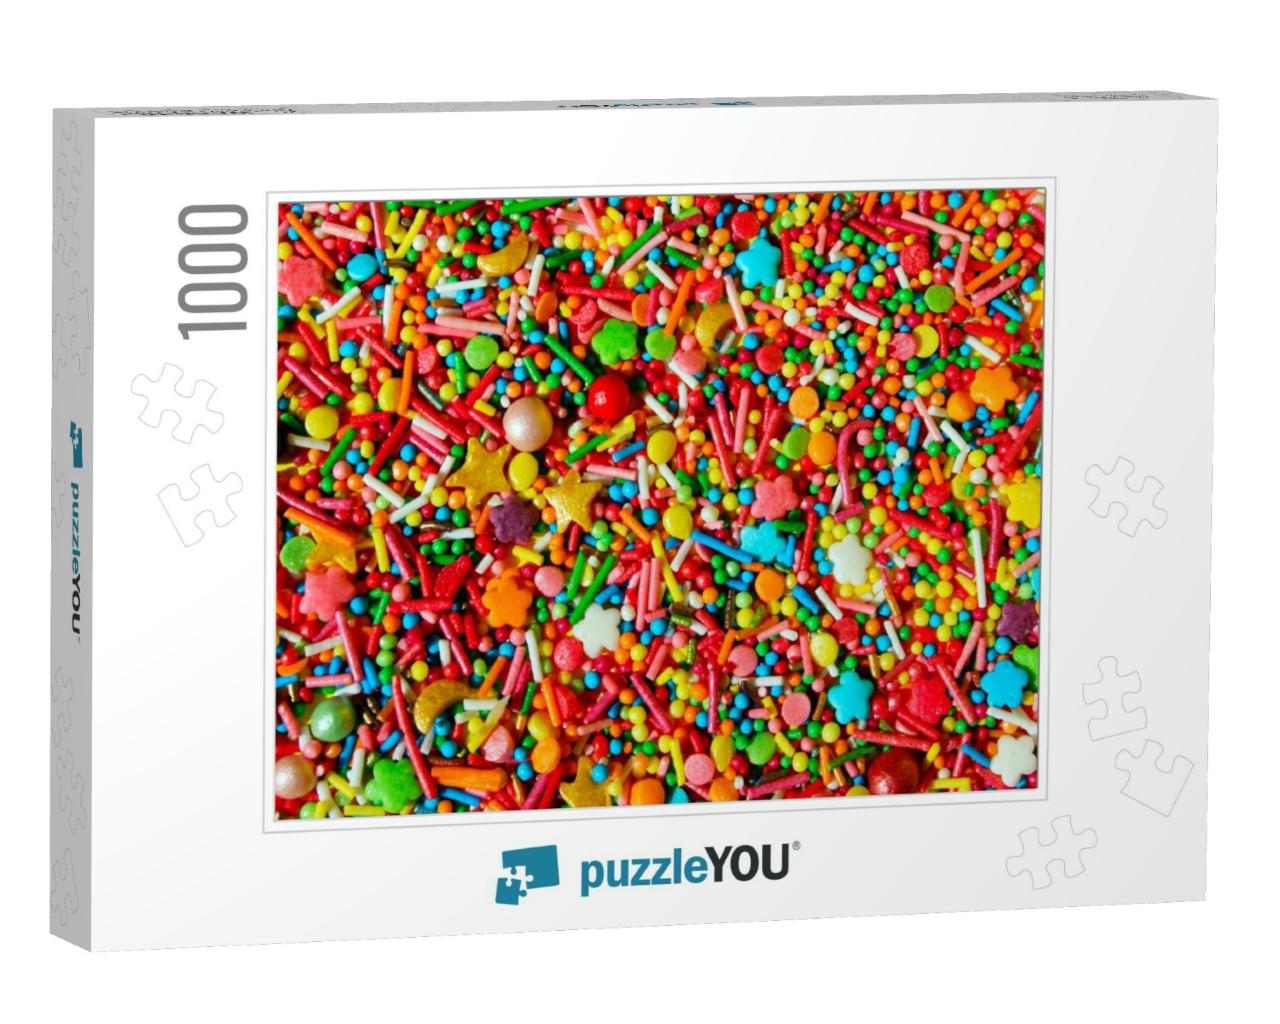 Abstract Colorful Background. Colorful Candies Background... Jigsaw Puzzle with 1000 pieces